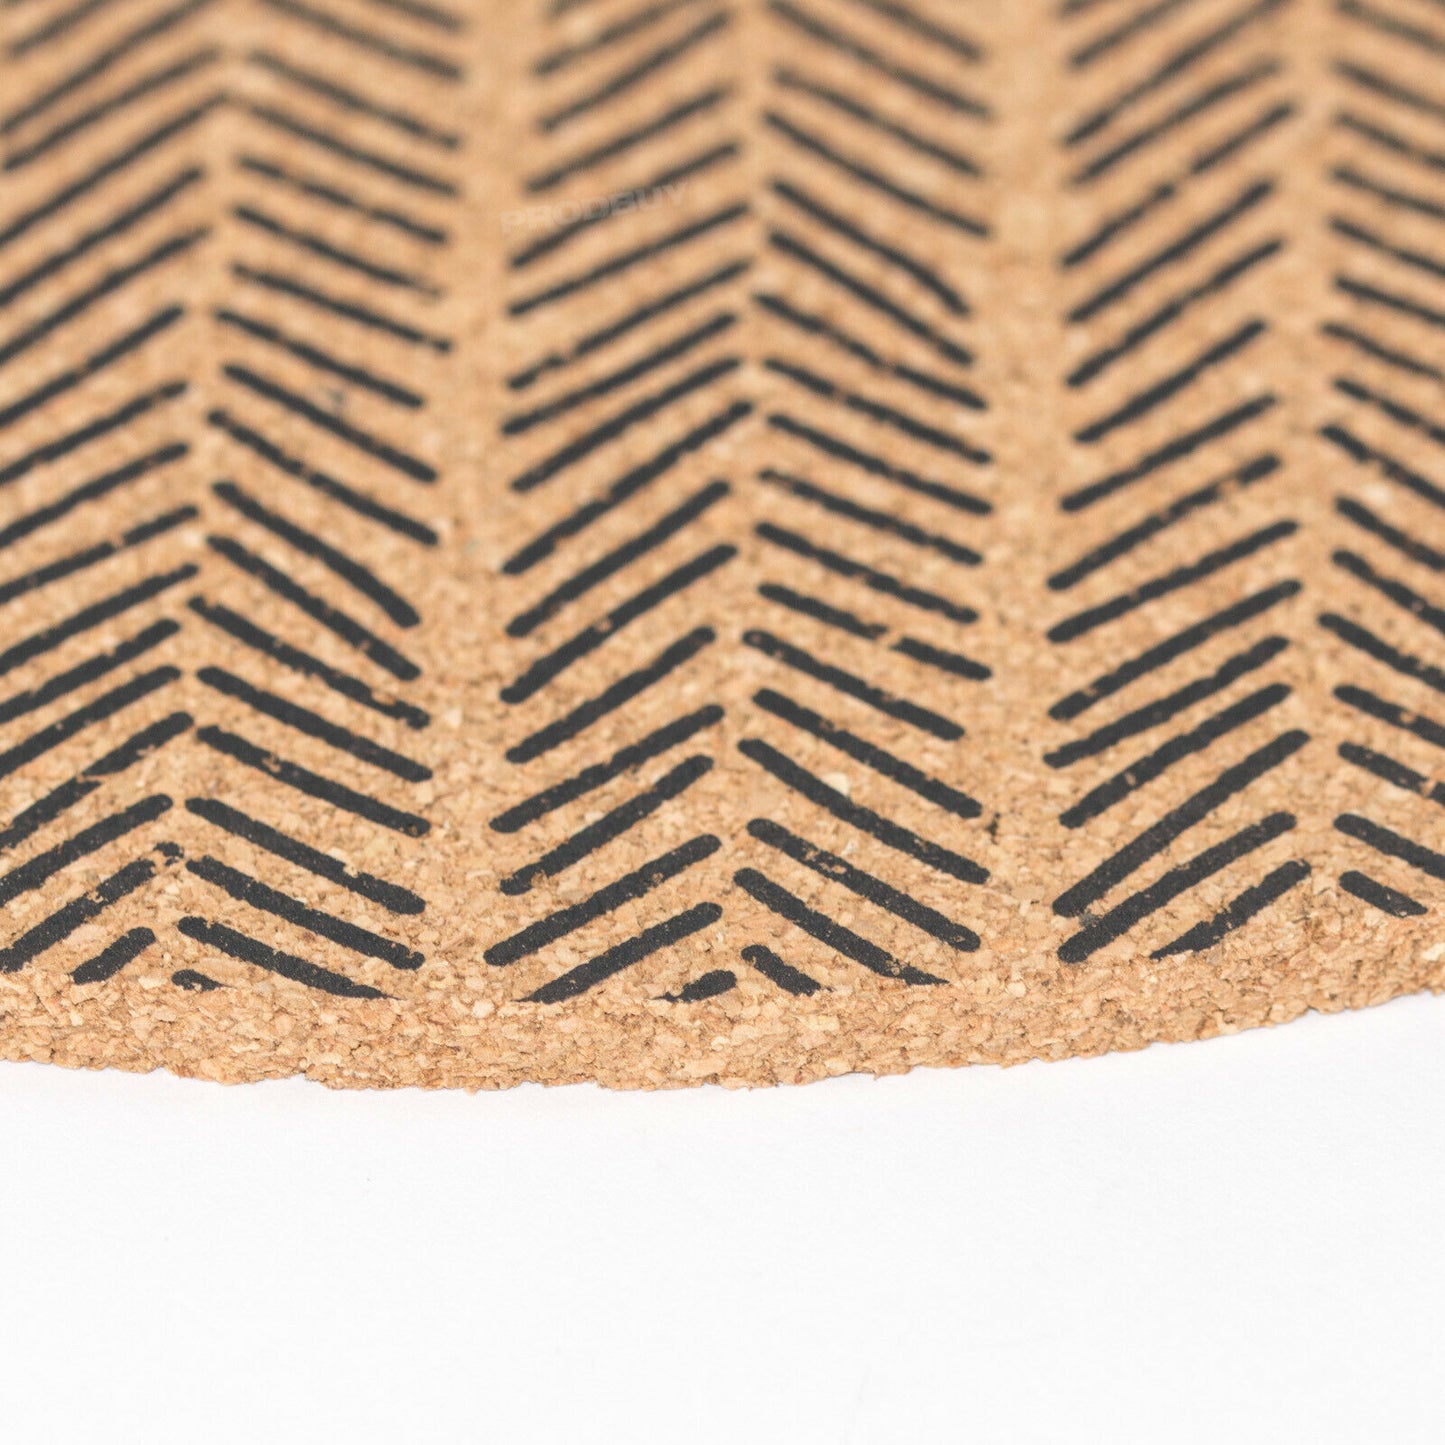 Pack of 4 Monochrome Cork Placemats with Black Print